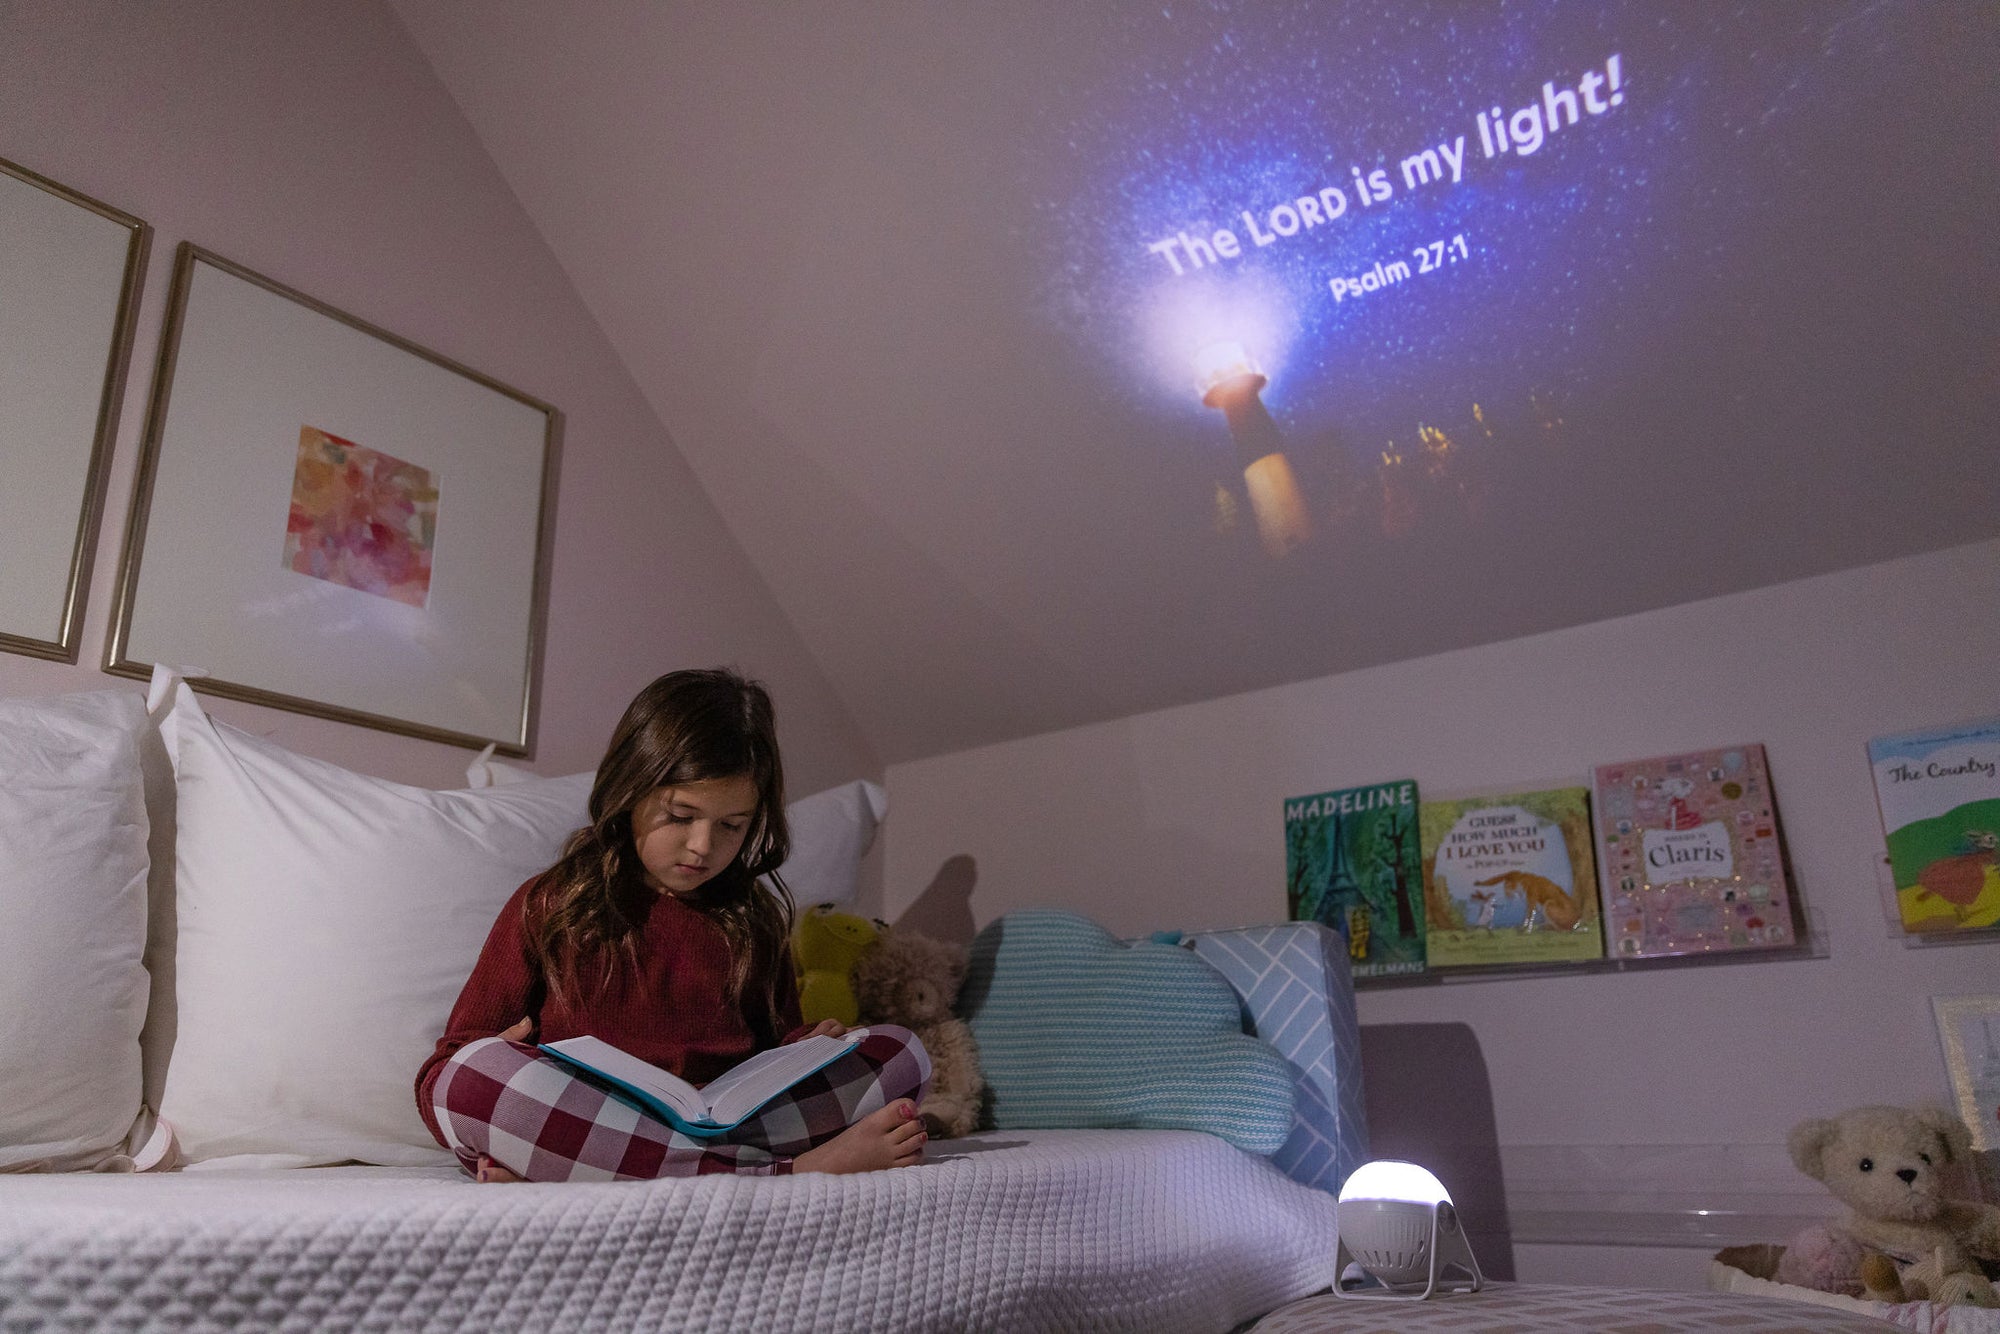 Young girl reading as projector shows bible verses on ceiling